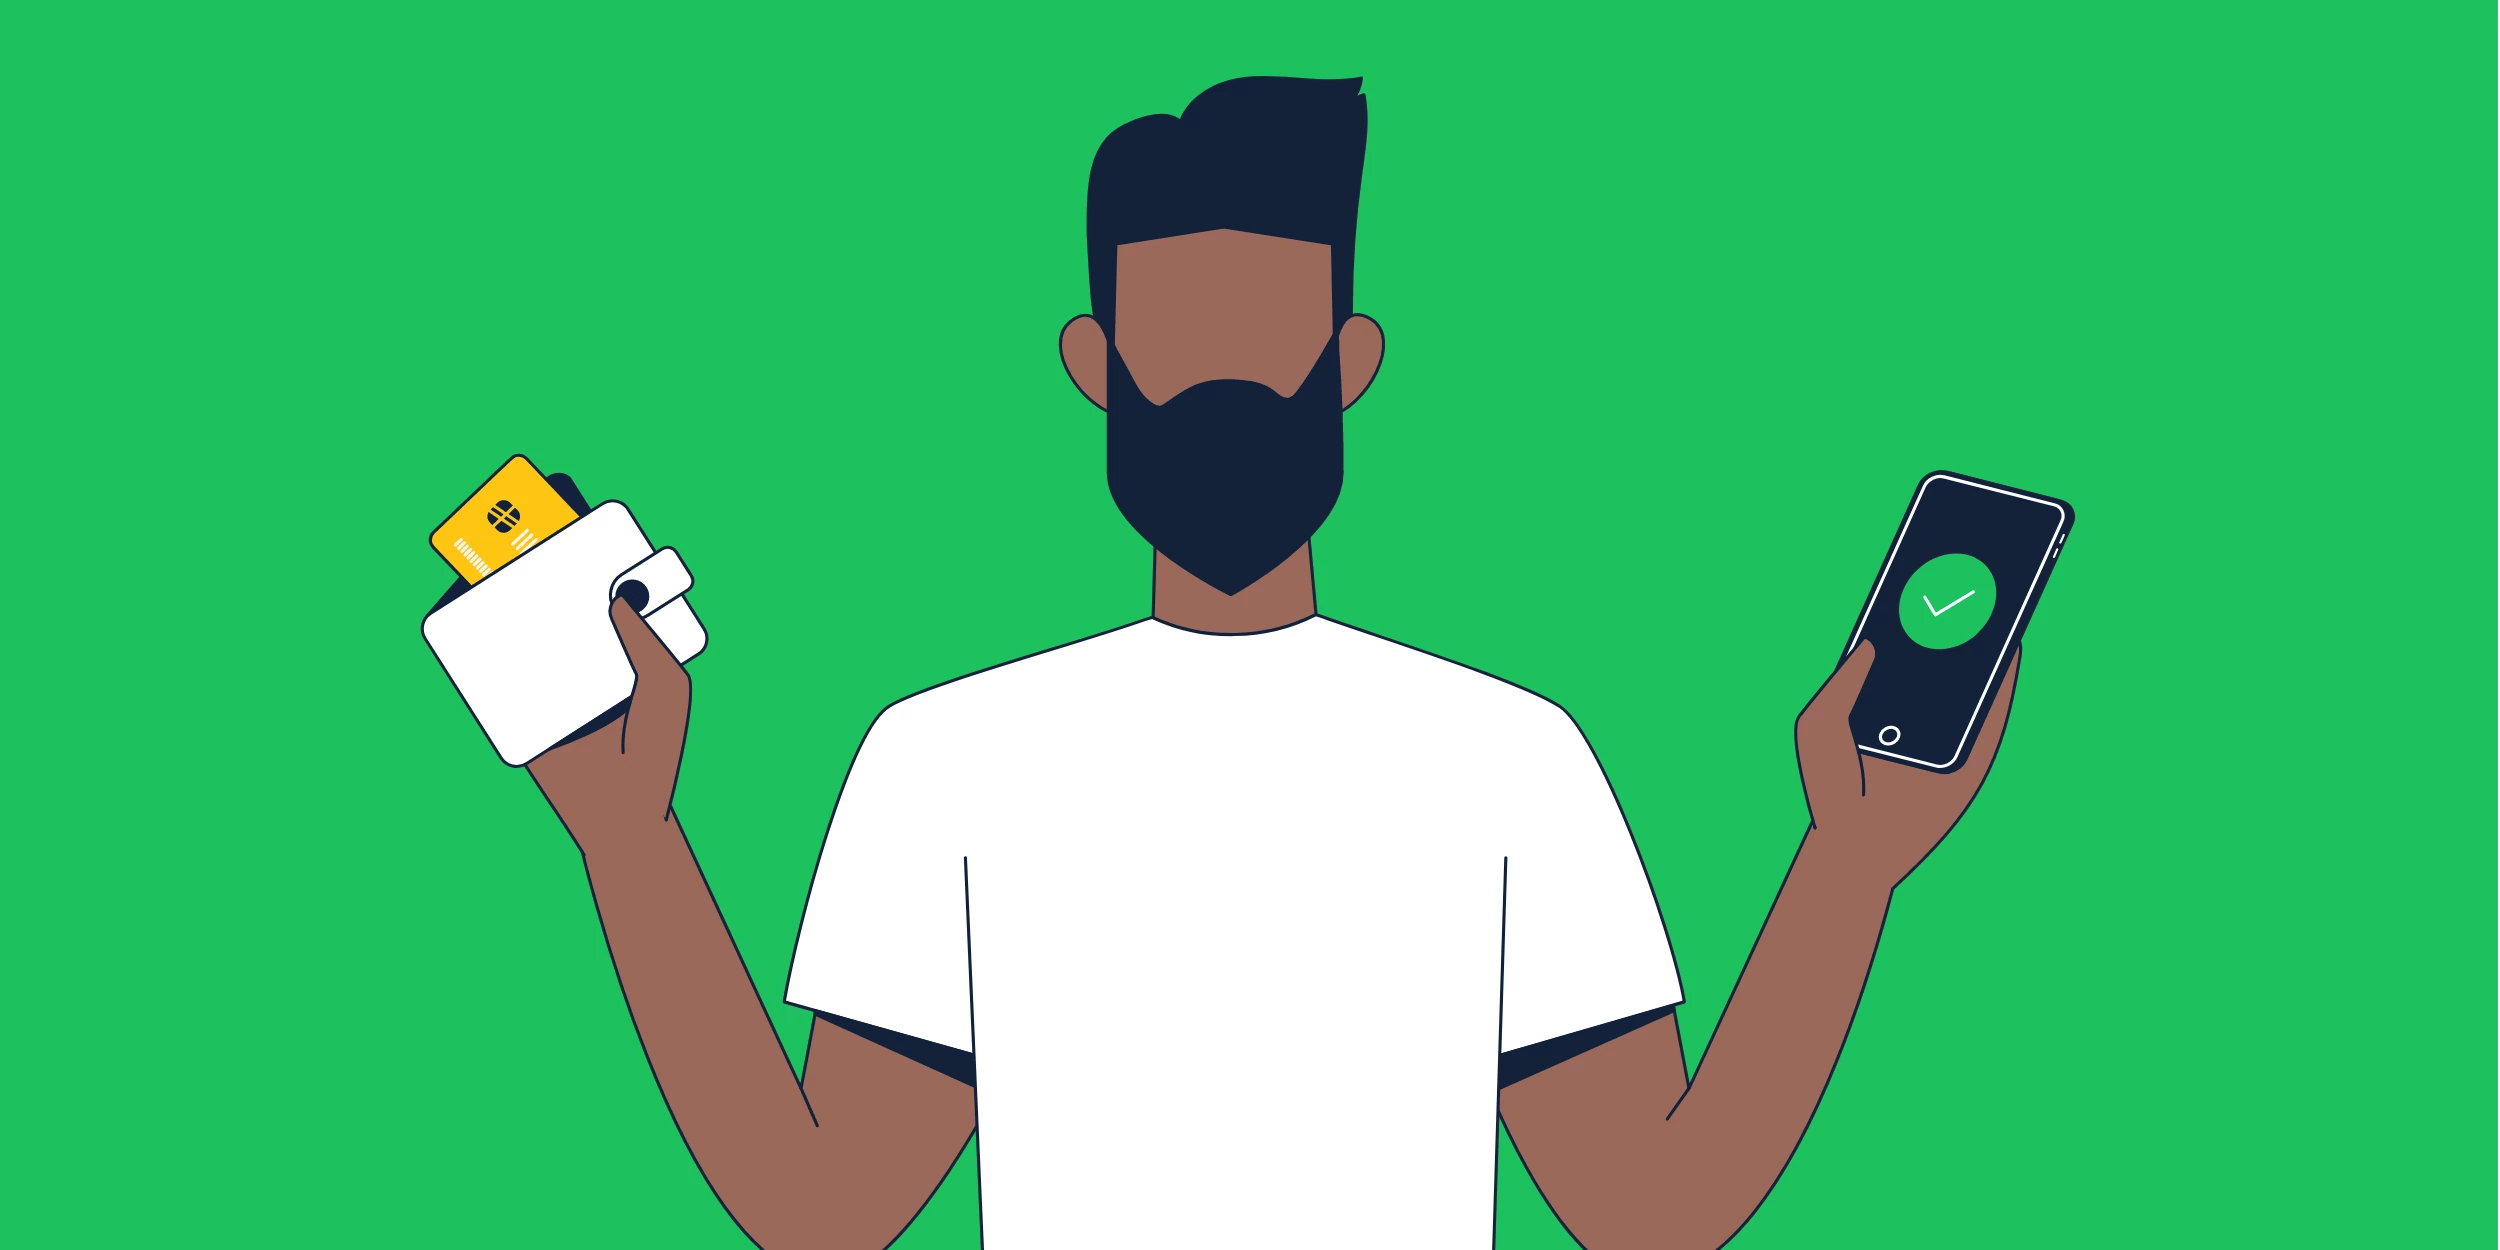 Man holding a phone and a wallet on a green background